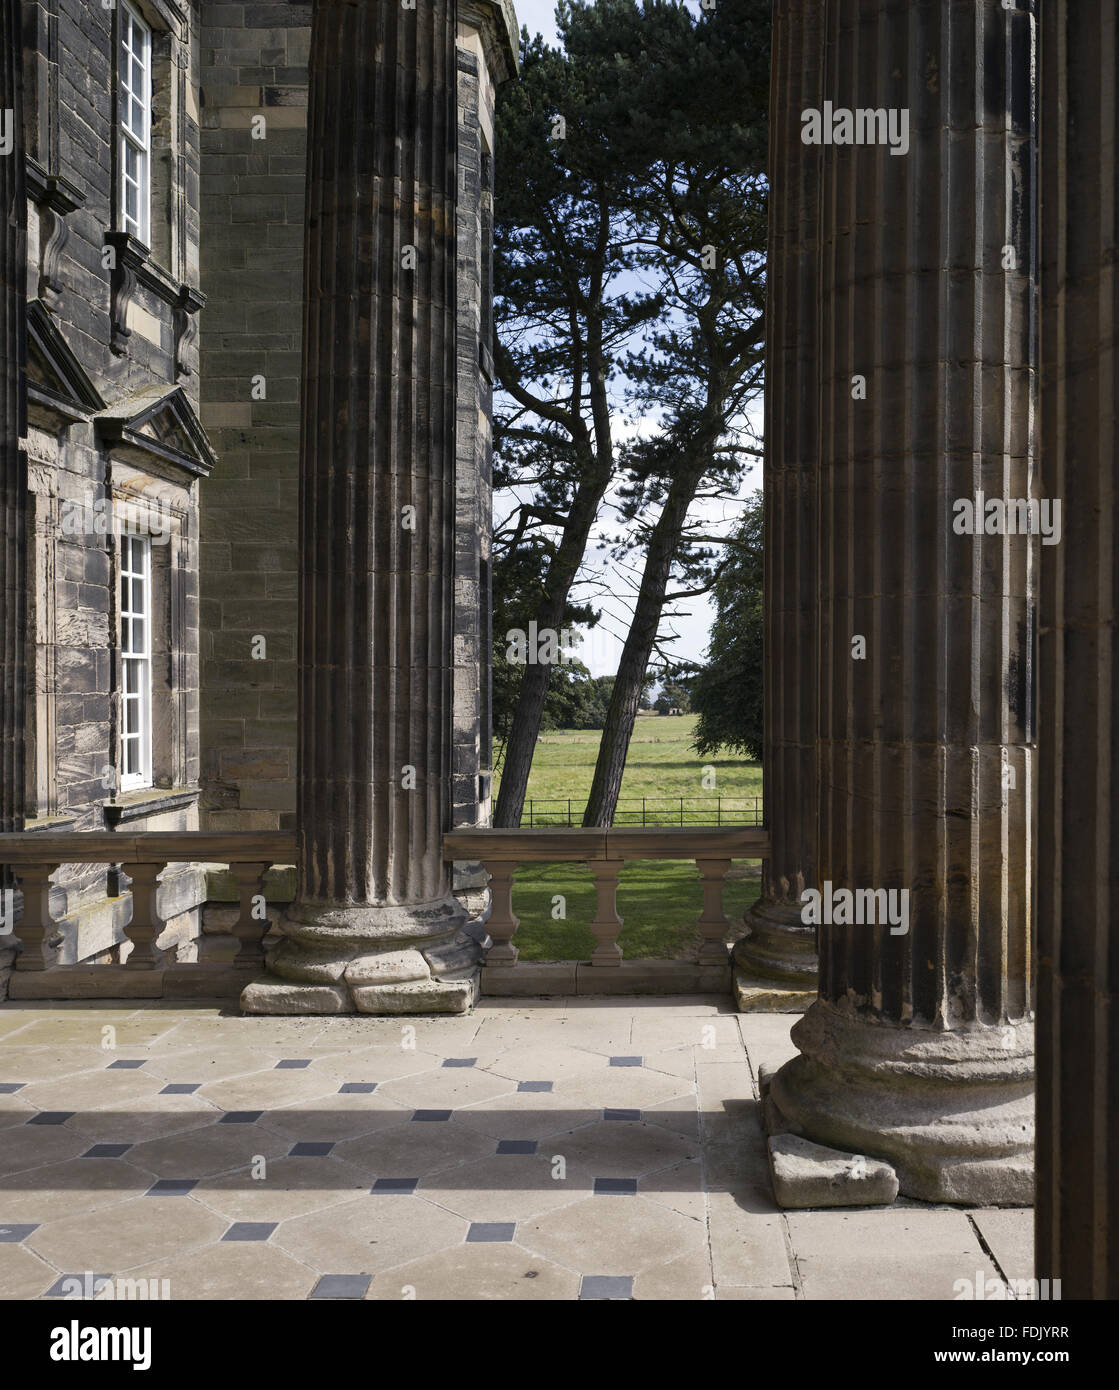 A view through the columns of the portico at Seaton Delaval Hall, Northumberland. The house was built for Admiral George Delaval by Sir John Vanbrugh, between 1718 and 1728, in the English Baroque style. Stock Photo